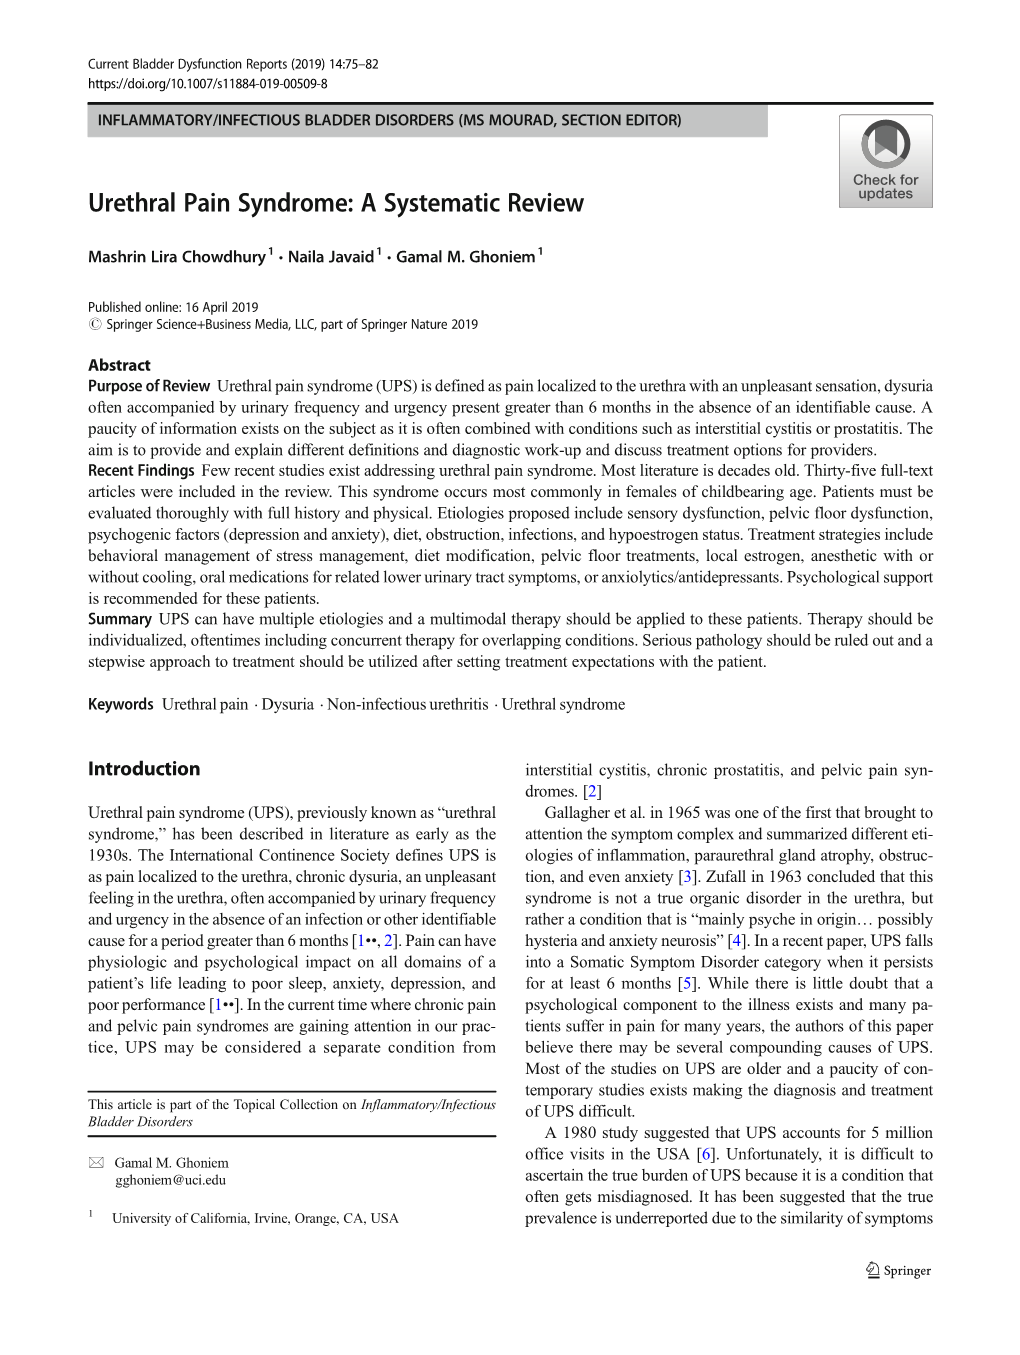 Urethral Pain Syndrome: a Systematic Review